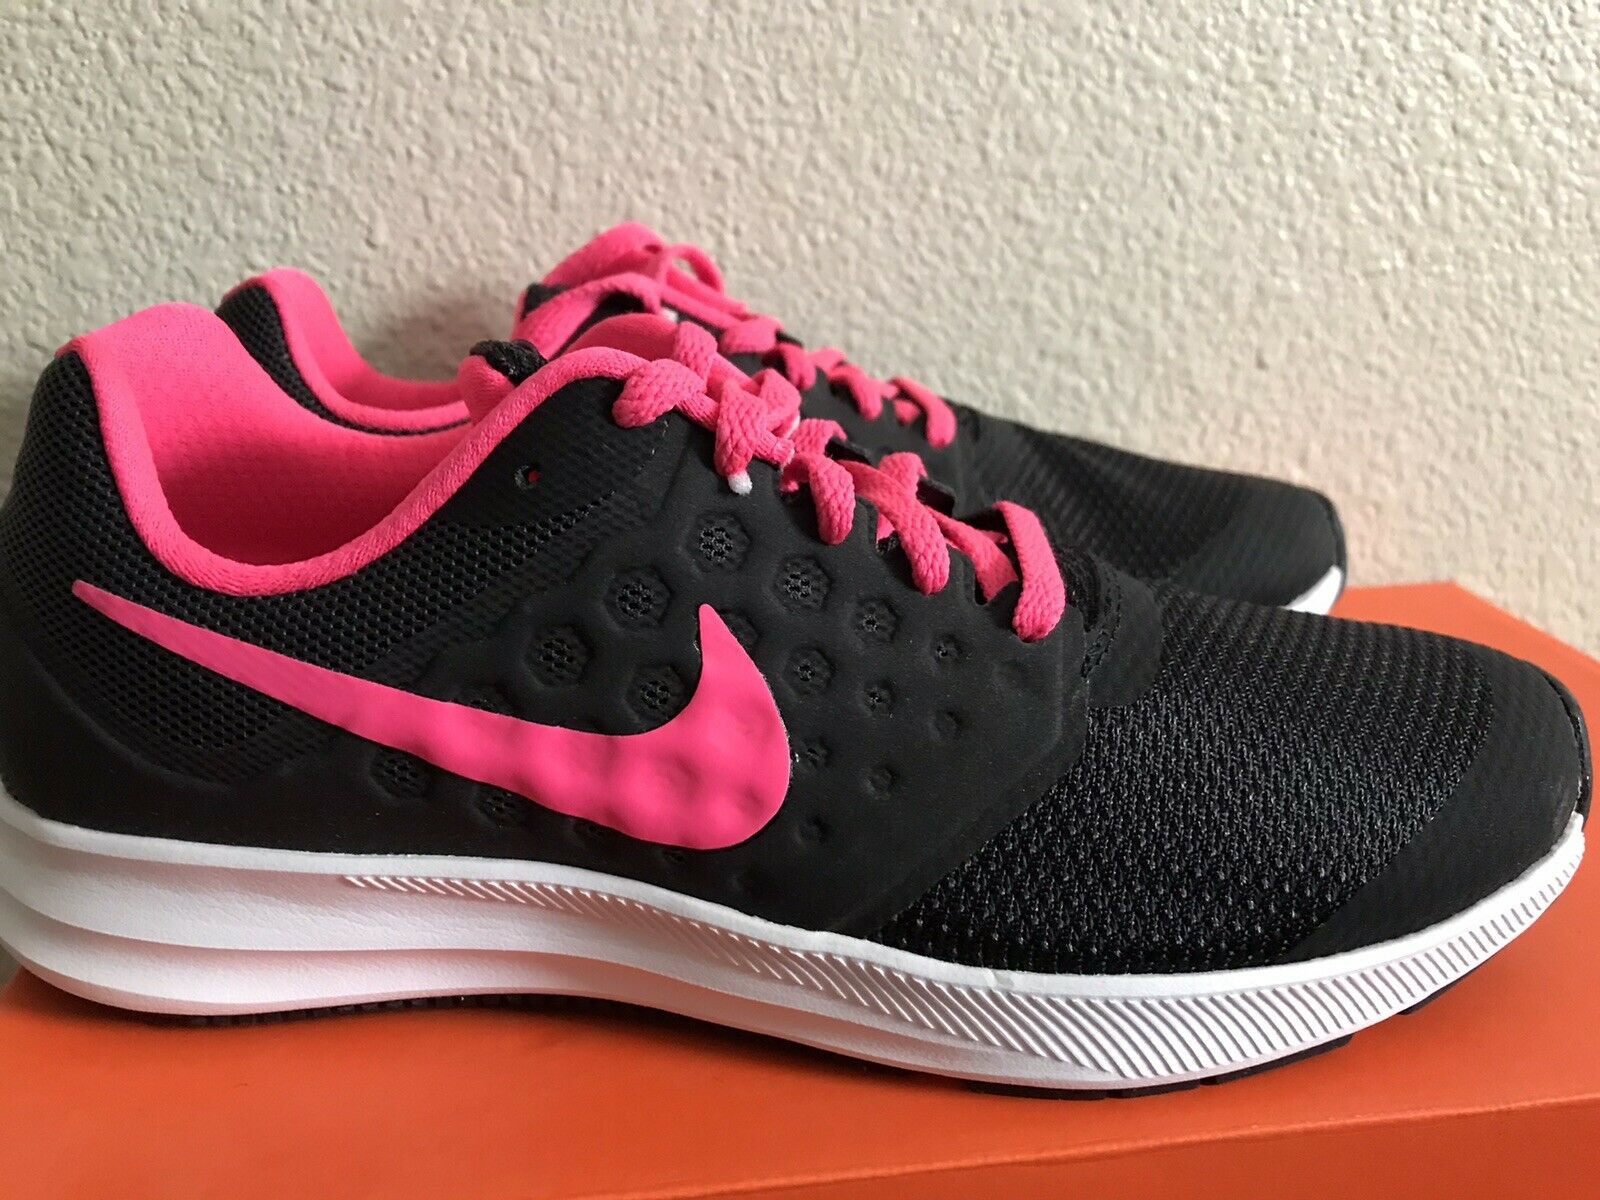 Nike Downshifter 7 Sneakers Shoes Girls Size 6